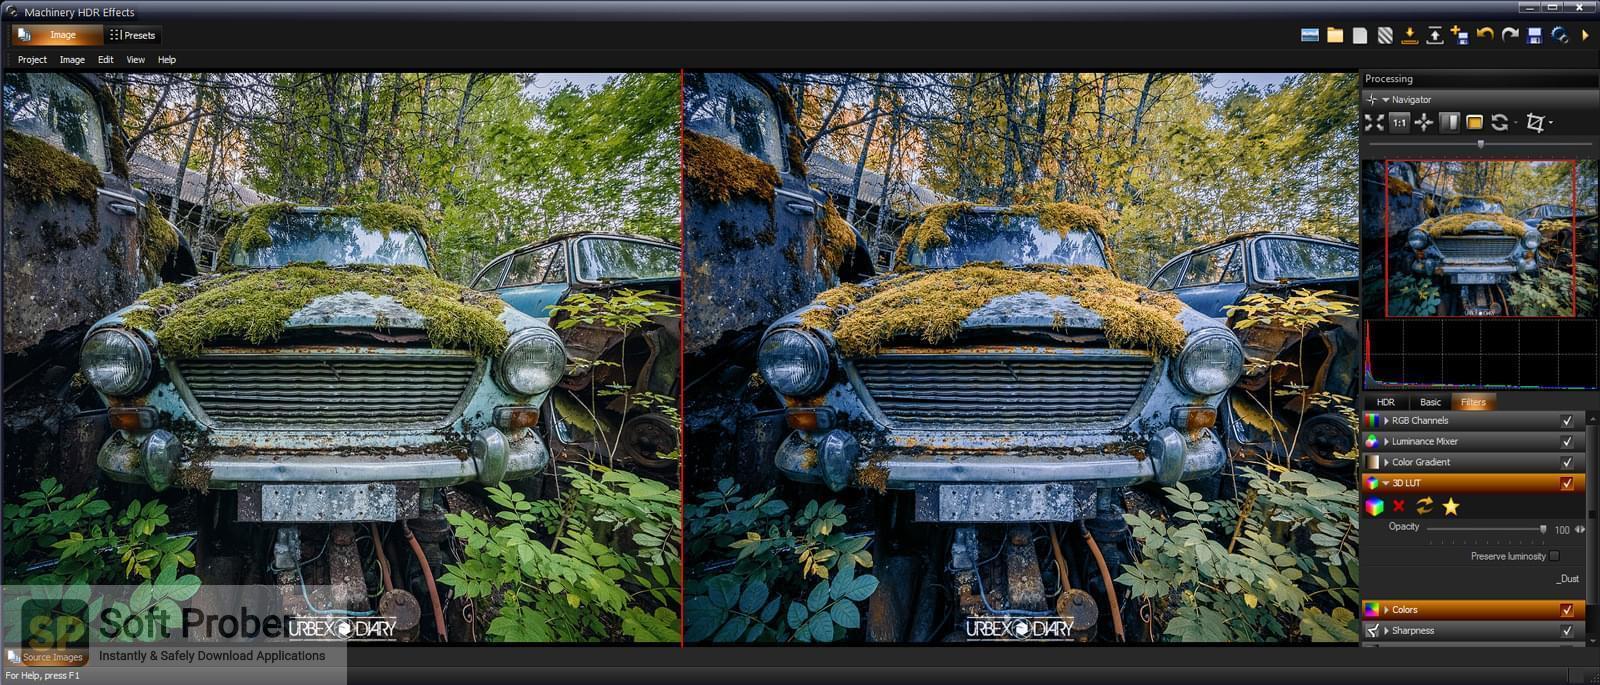 Machinery HDR Effects 3.1.4 download the new for android